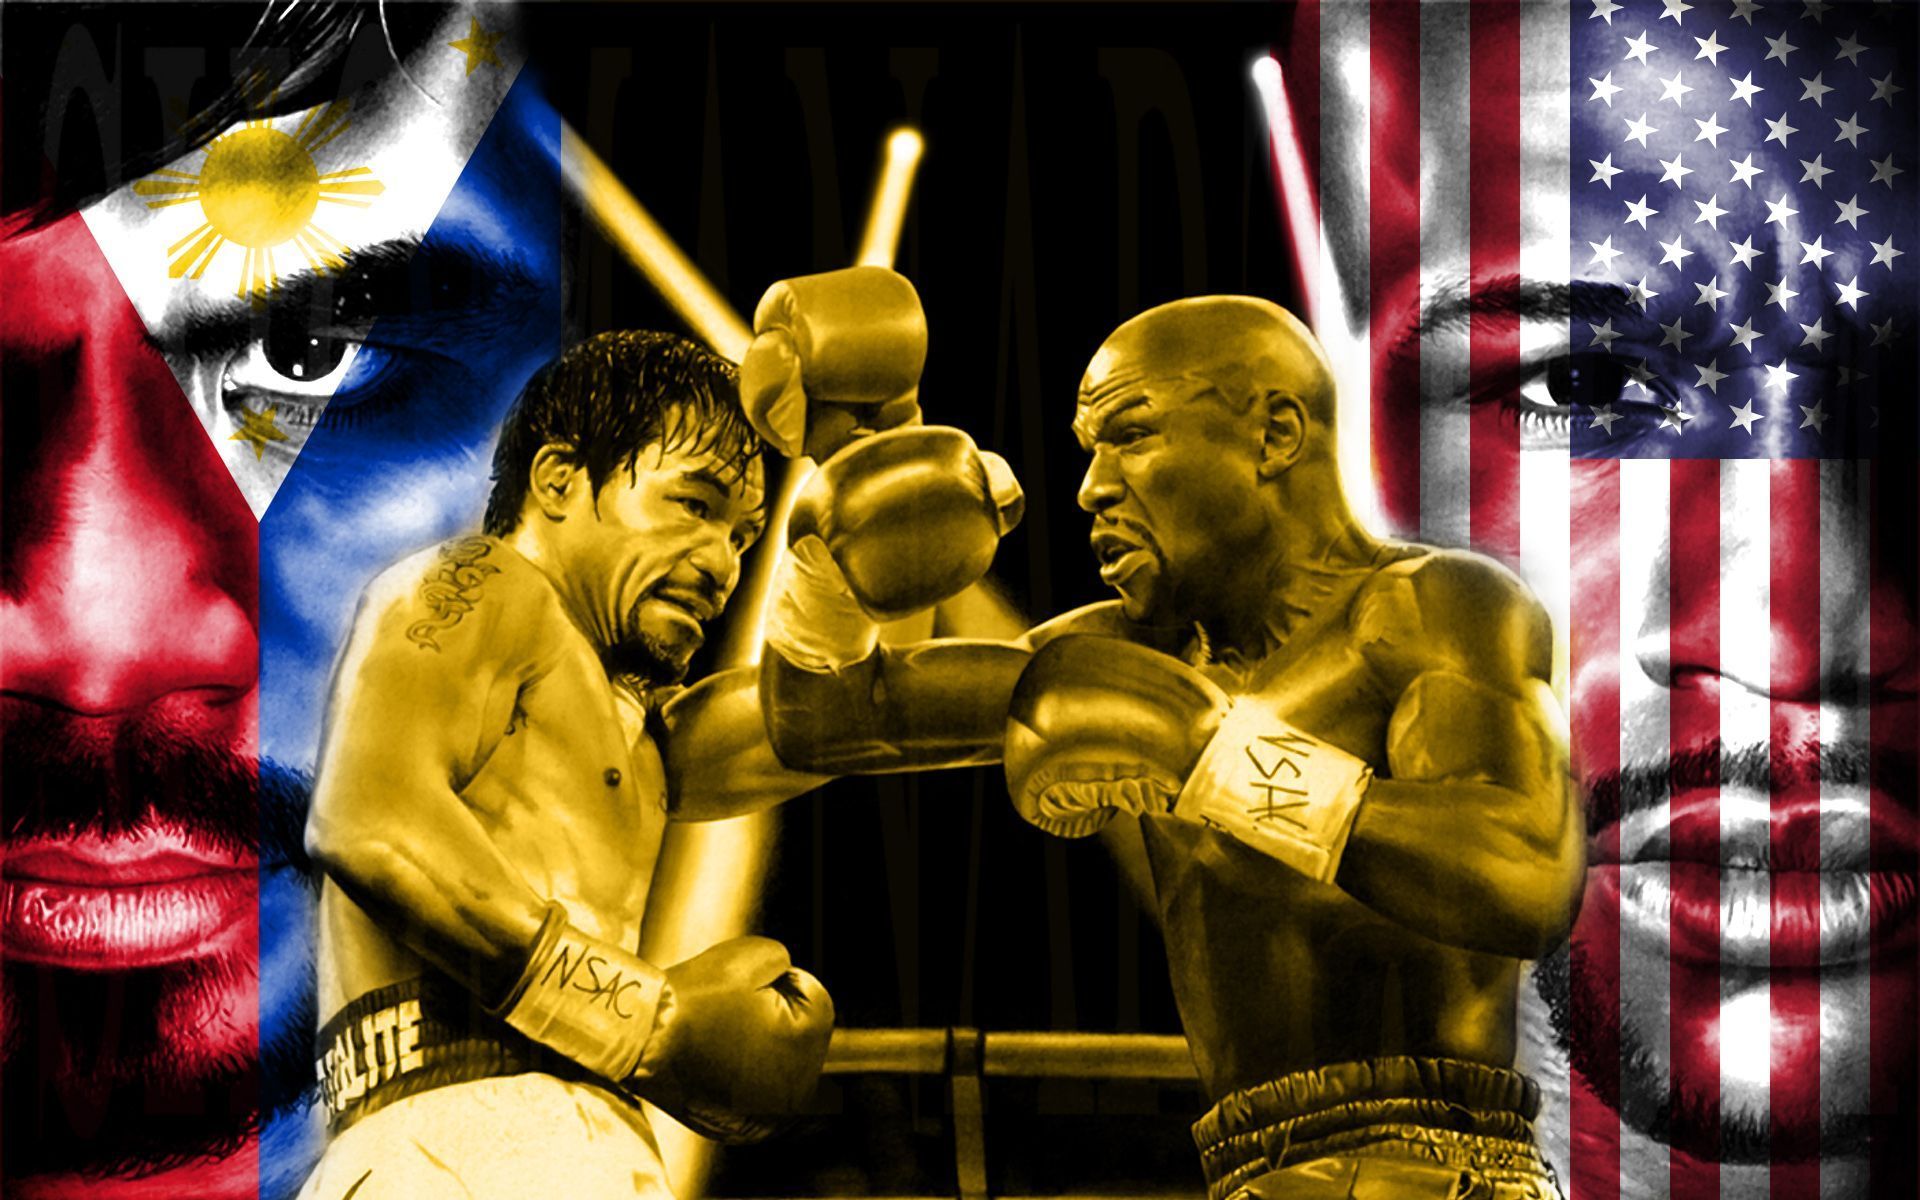 Manny Pacquiao Philippines vs Floyd Mayweather US 2015 Boxing Wallpaper